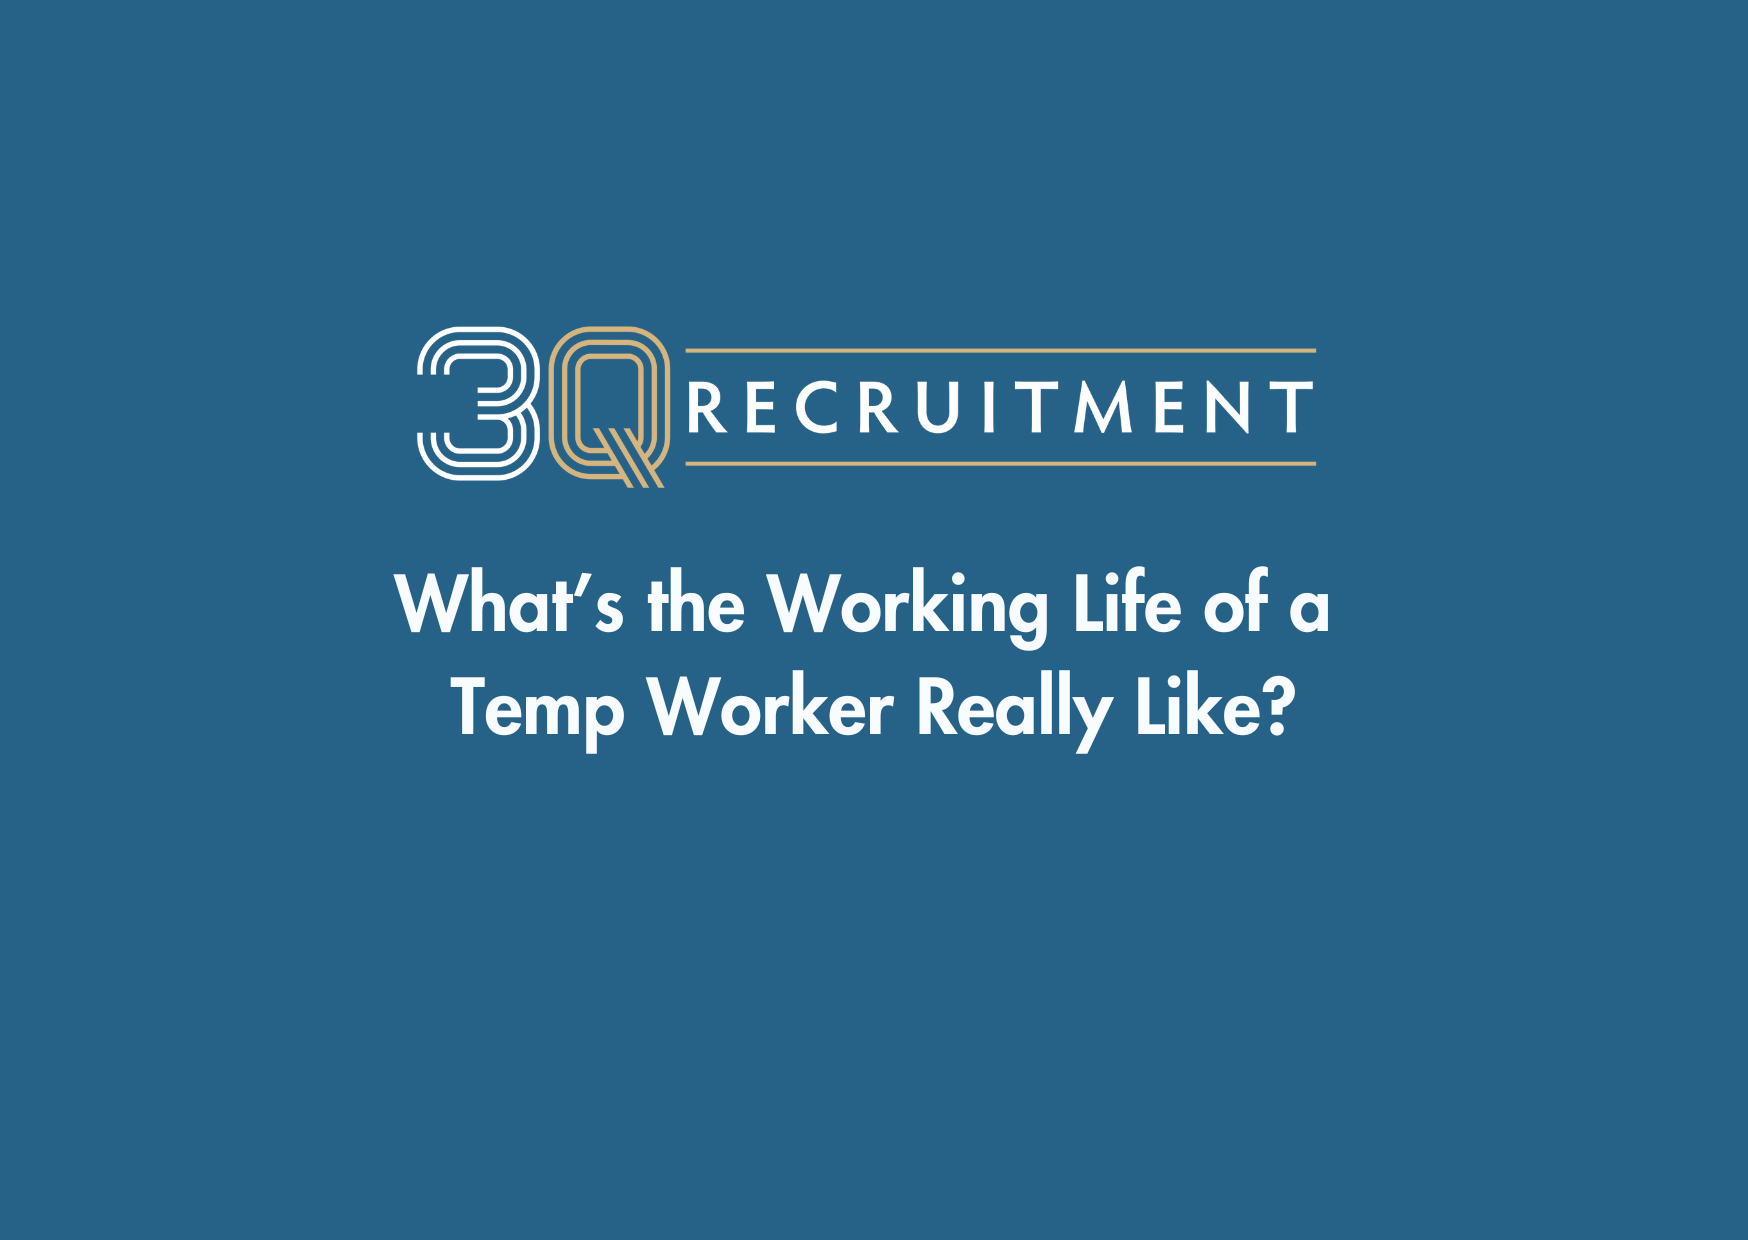 3Q Recruitment What’s the Working Life of a Temp Worker Really Like?